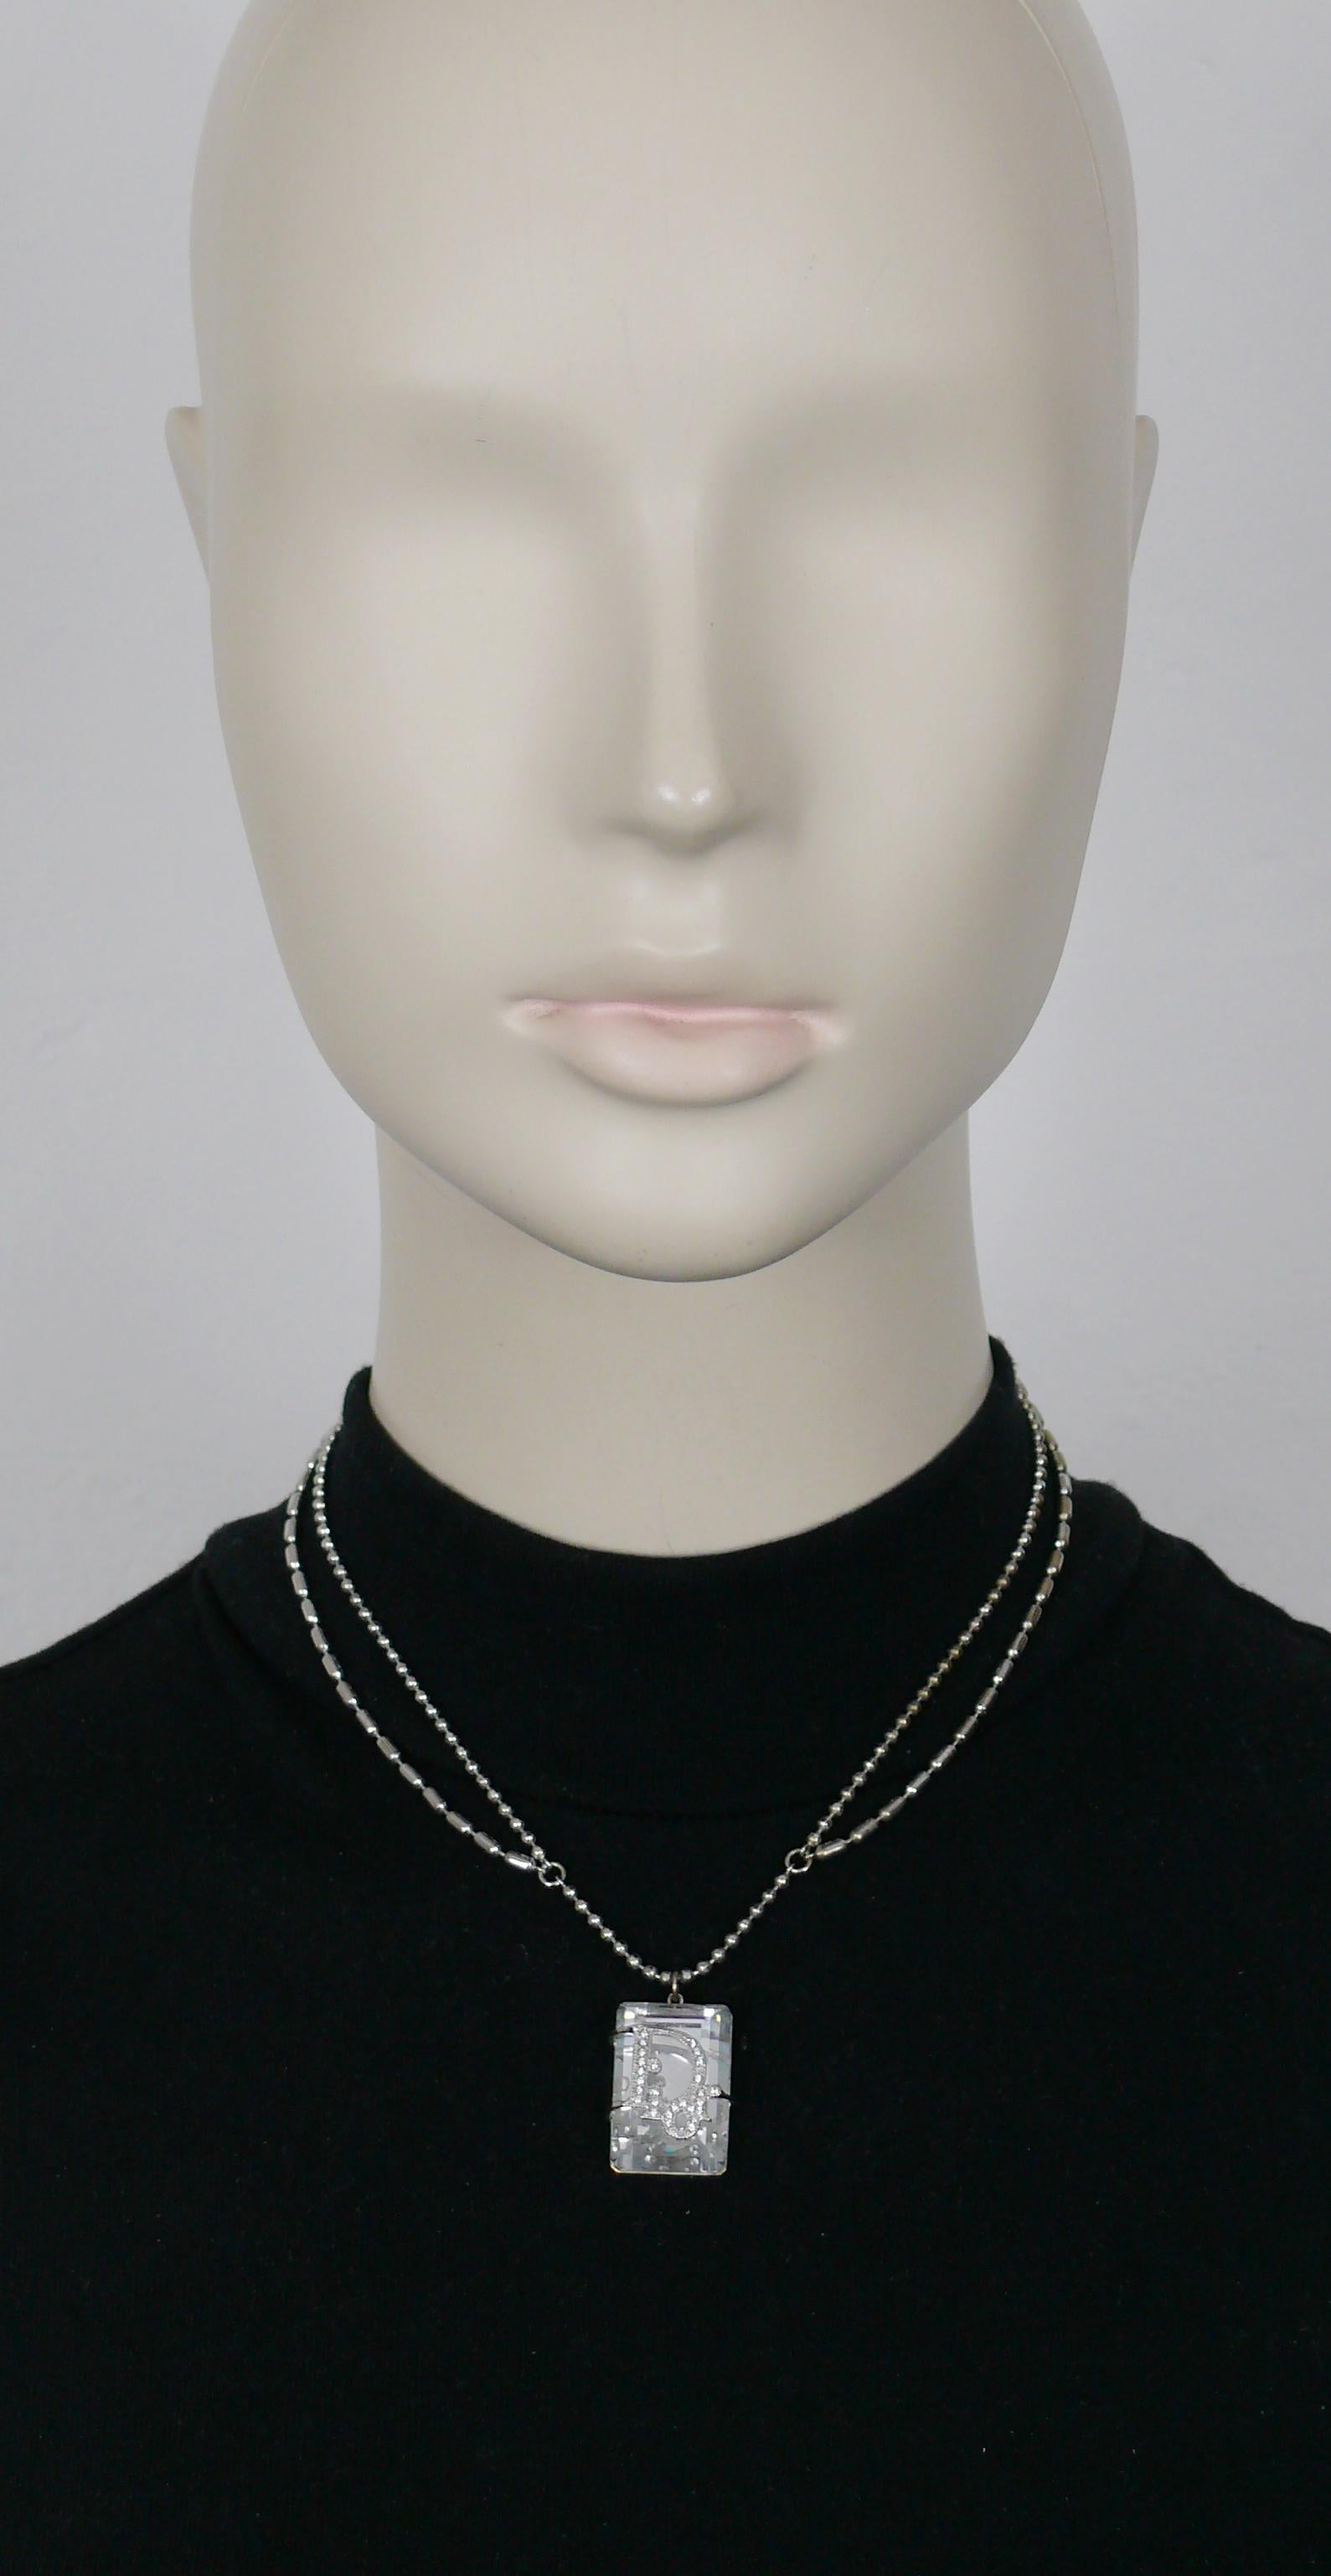 CHRISTIAN DIOR silver tone chain necklace featuring a large rectangular facetted clear crystal pendant encaged in a jewelled DIOR logo.

Adjustable lobster clasp closure.

Embossed DIOR.

Indicative measurements : adjustable length from approx. 38